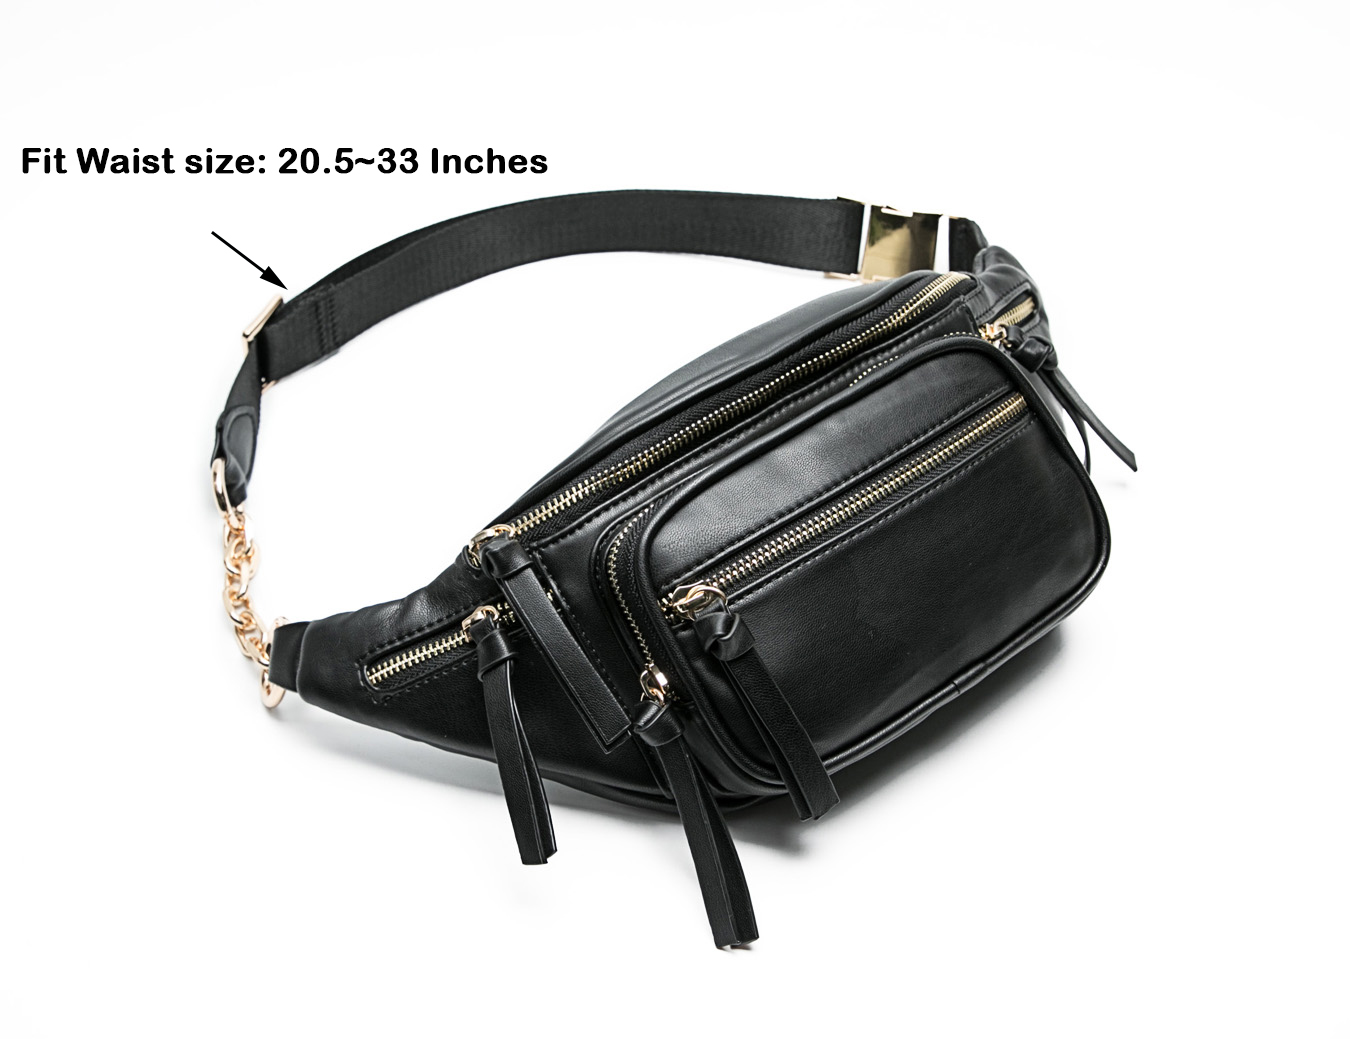  Leather Waist Bag For Women